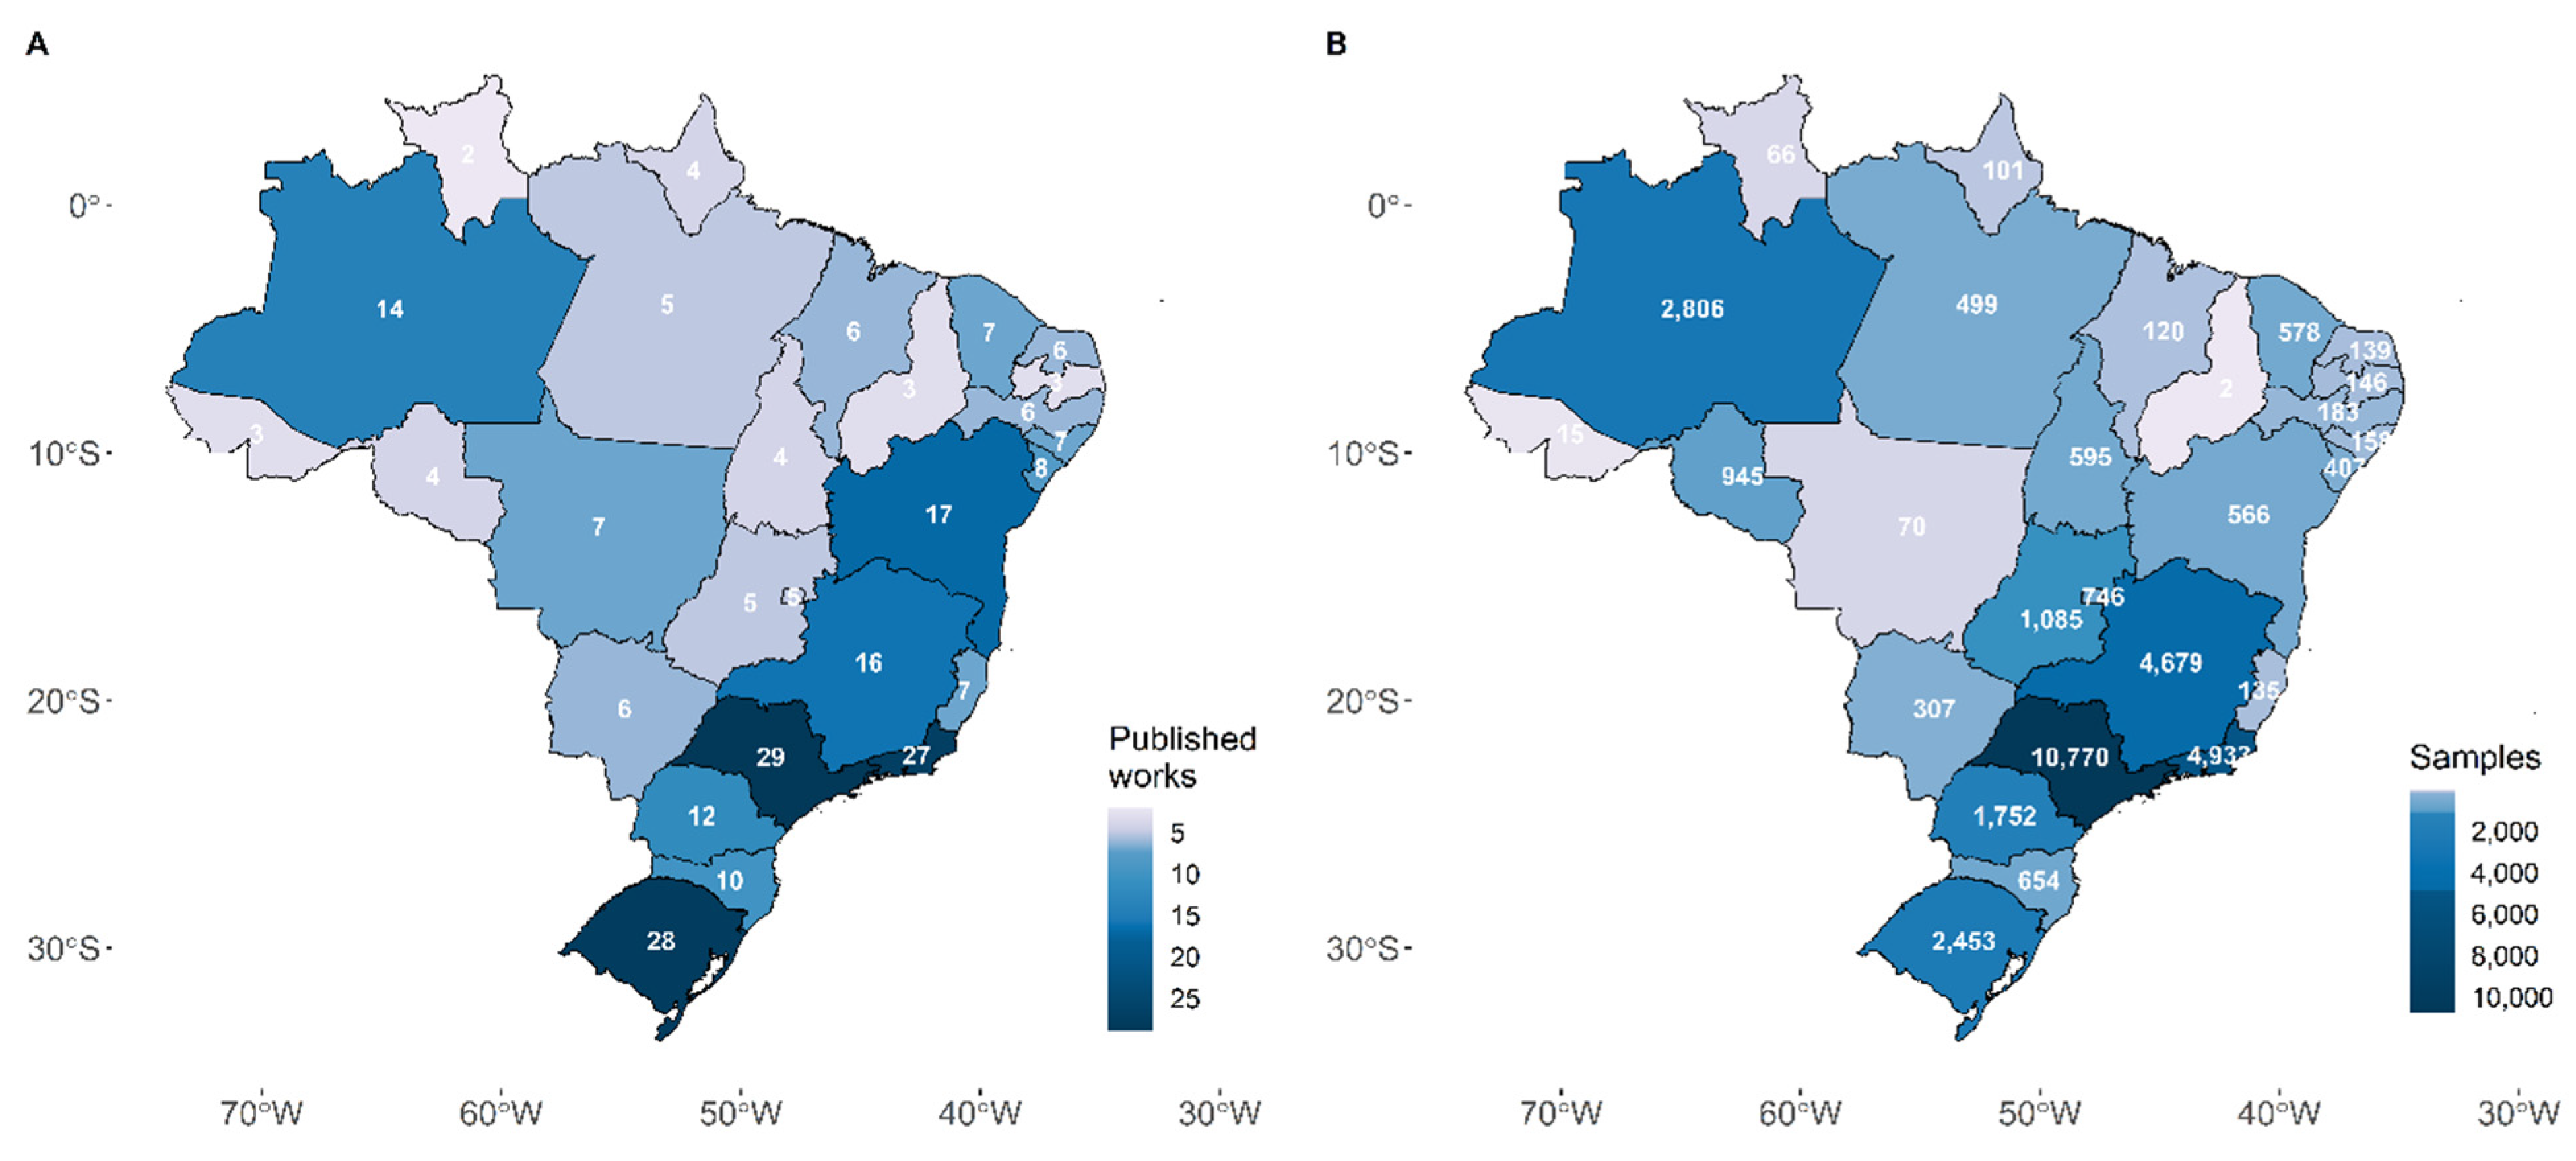 Viruses | Free Full-Text | SARS-CoV-2 Genomic Surveillance in Brazil: A  Systematic Review with Scientometric Analysis